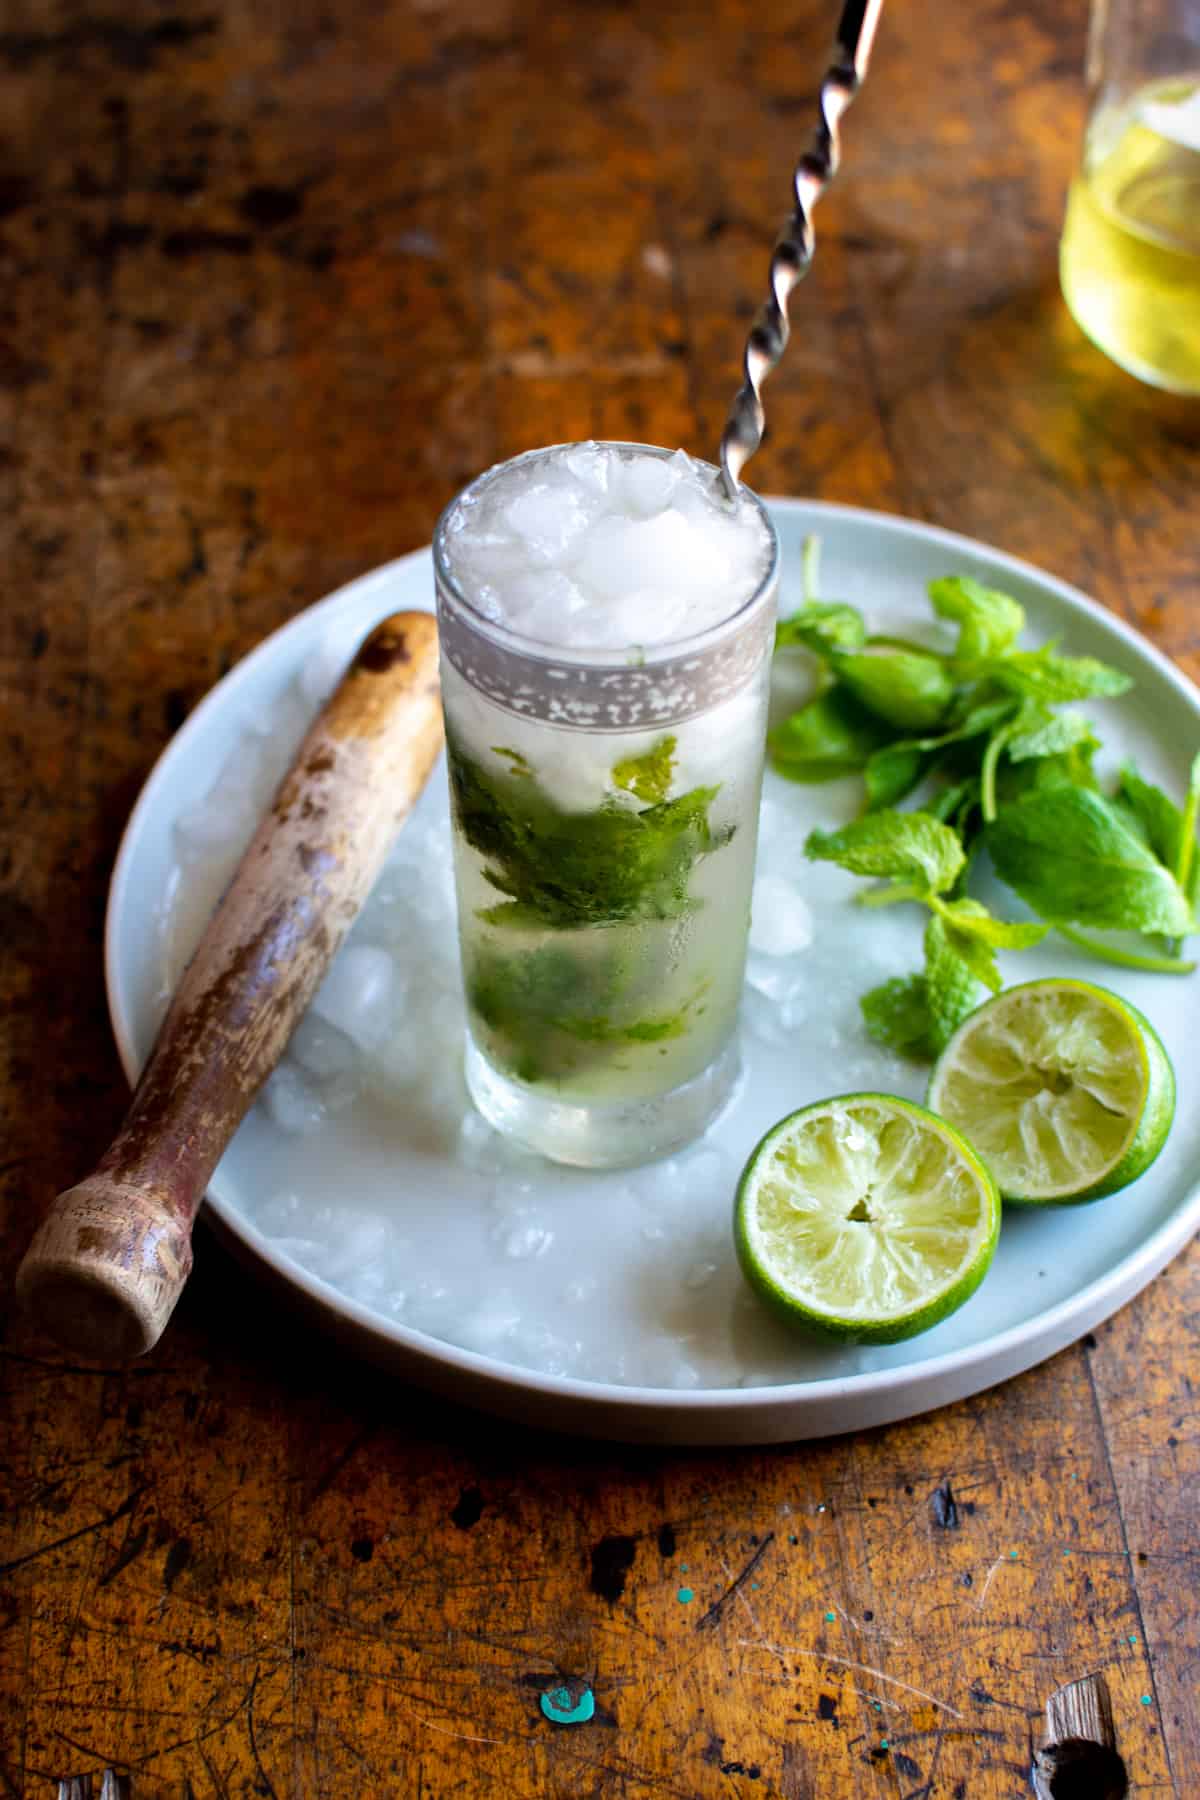 Rum, lime juice, mint leaves, and simple syrup are all you need to make this classic Mojito recipe. An absolutely thirst-quenching summer cocktail. #mojitorecipe #holajalapeno #mojito #summercocktails